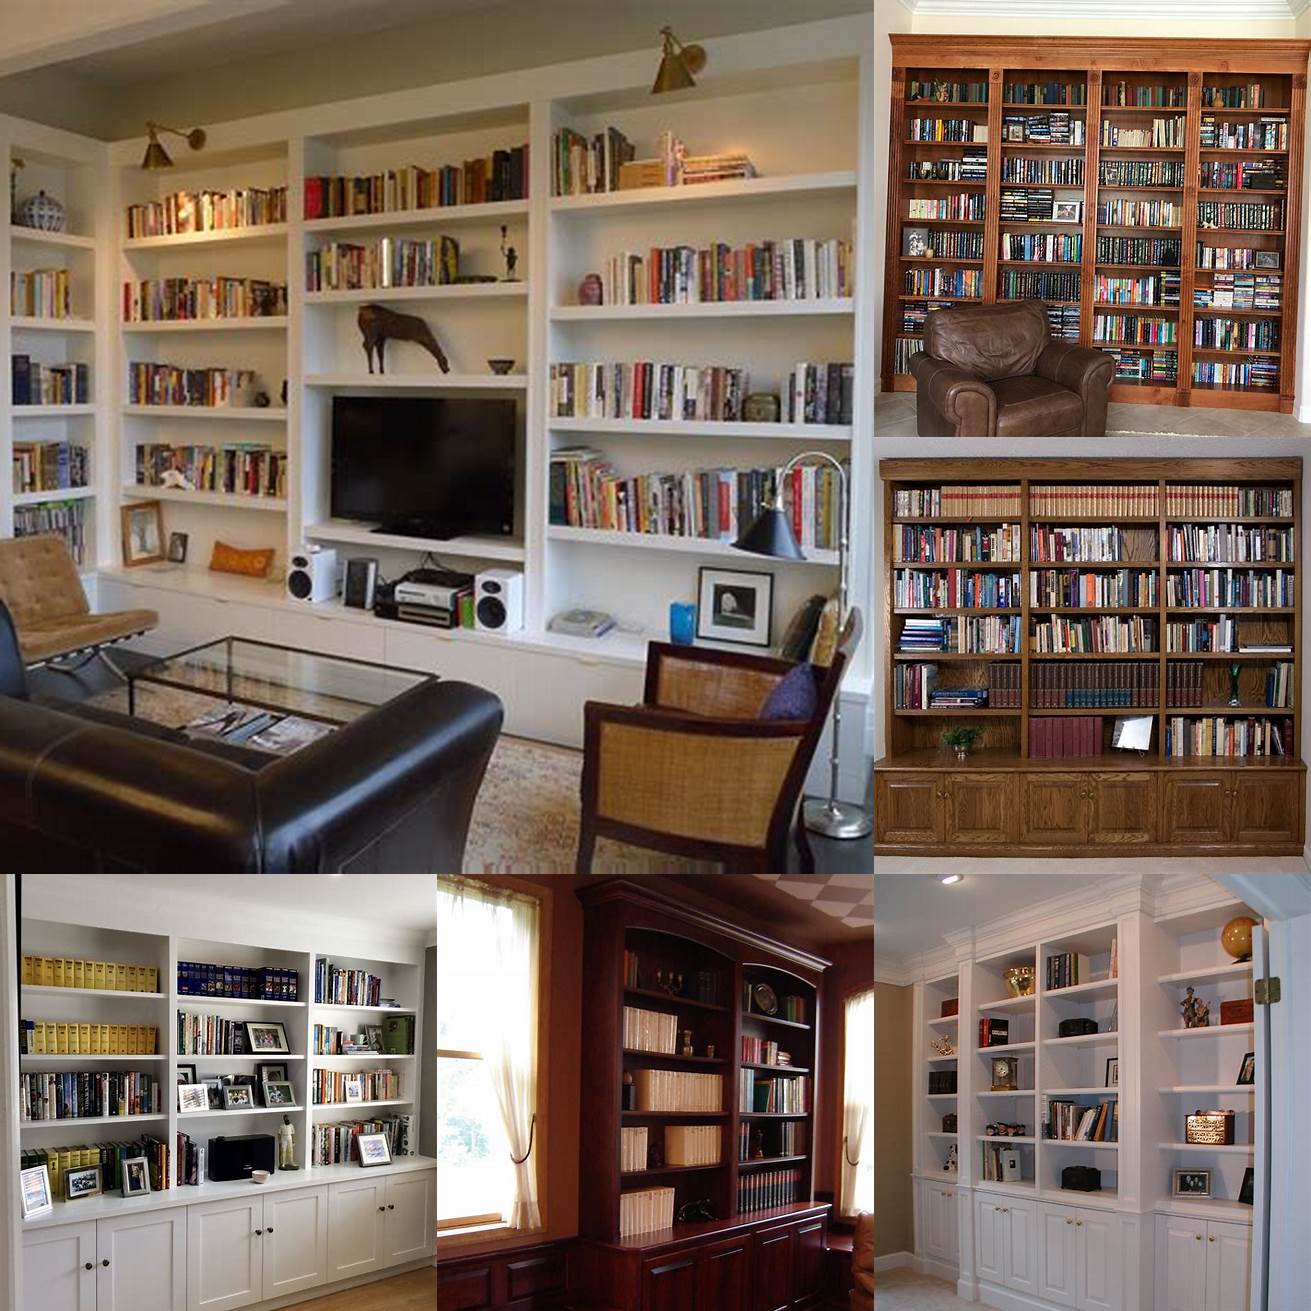 A custom bookshelf can be a great addition to any room providing both storage and style